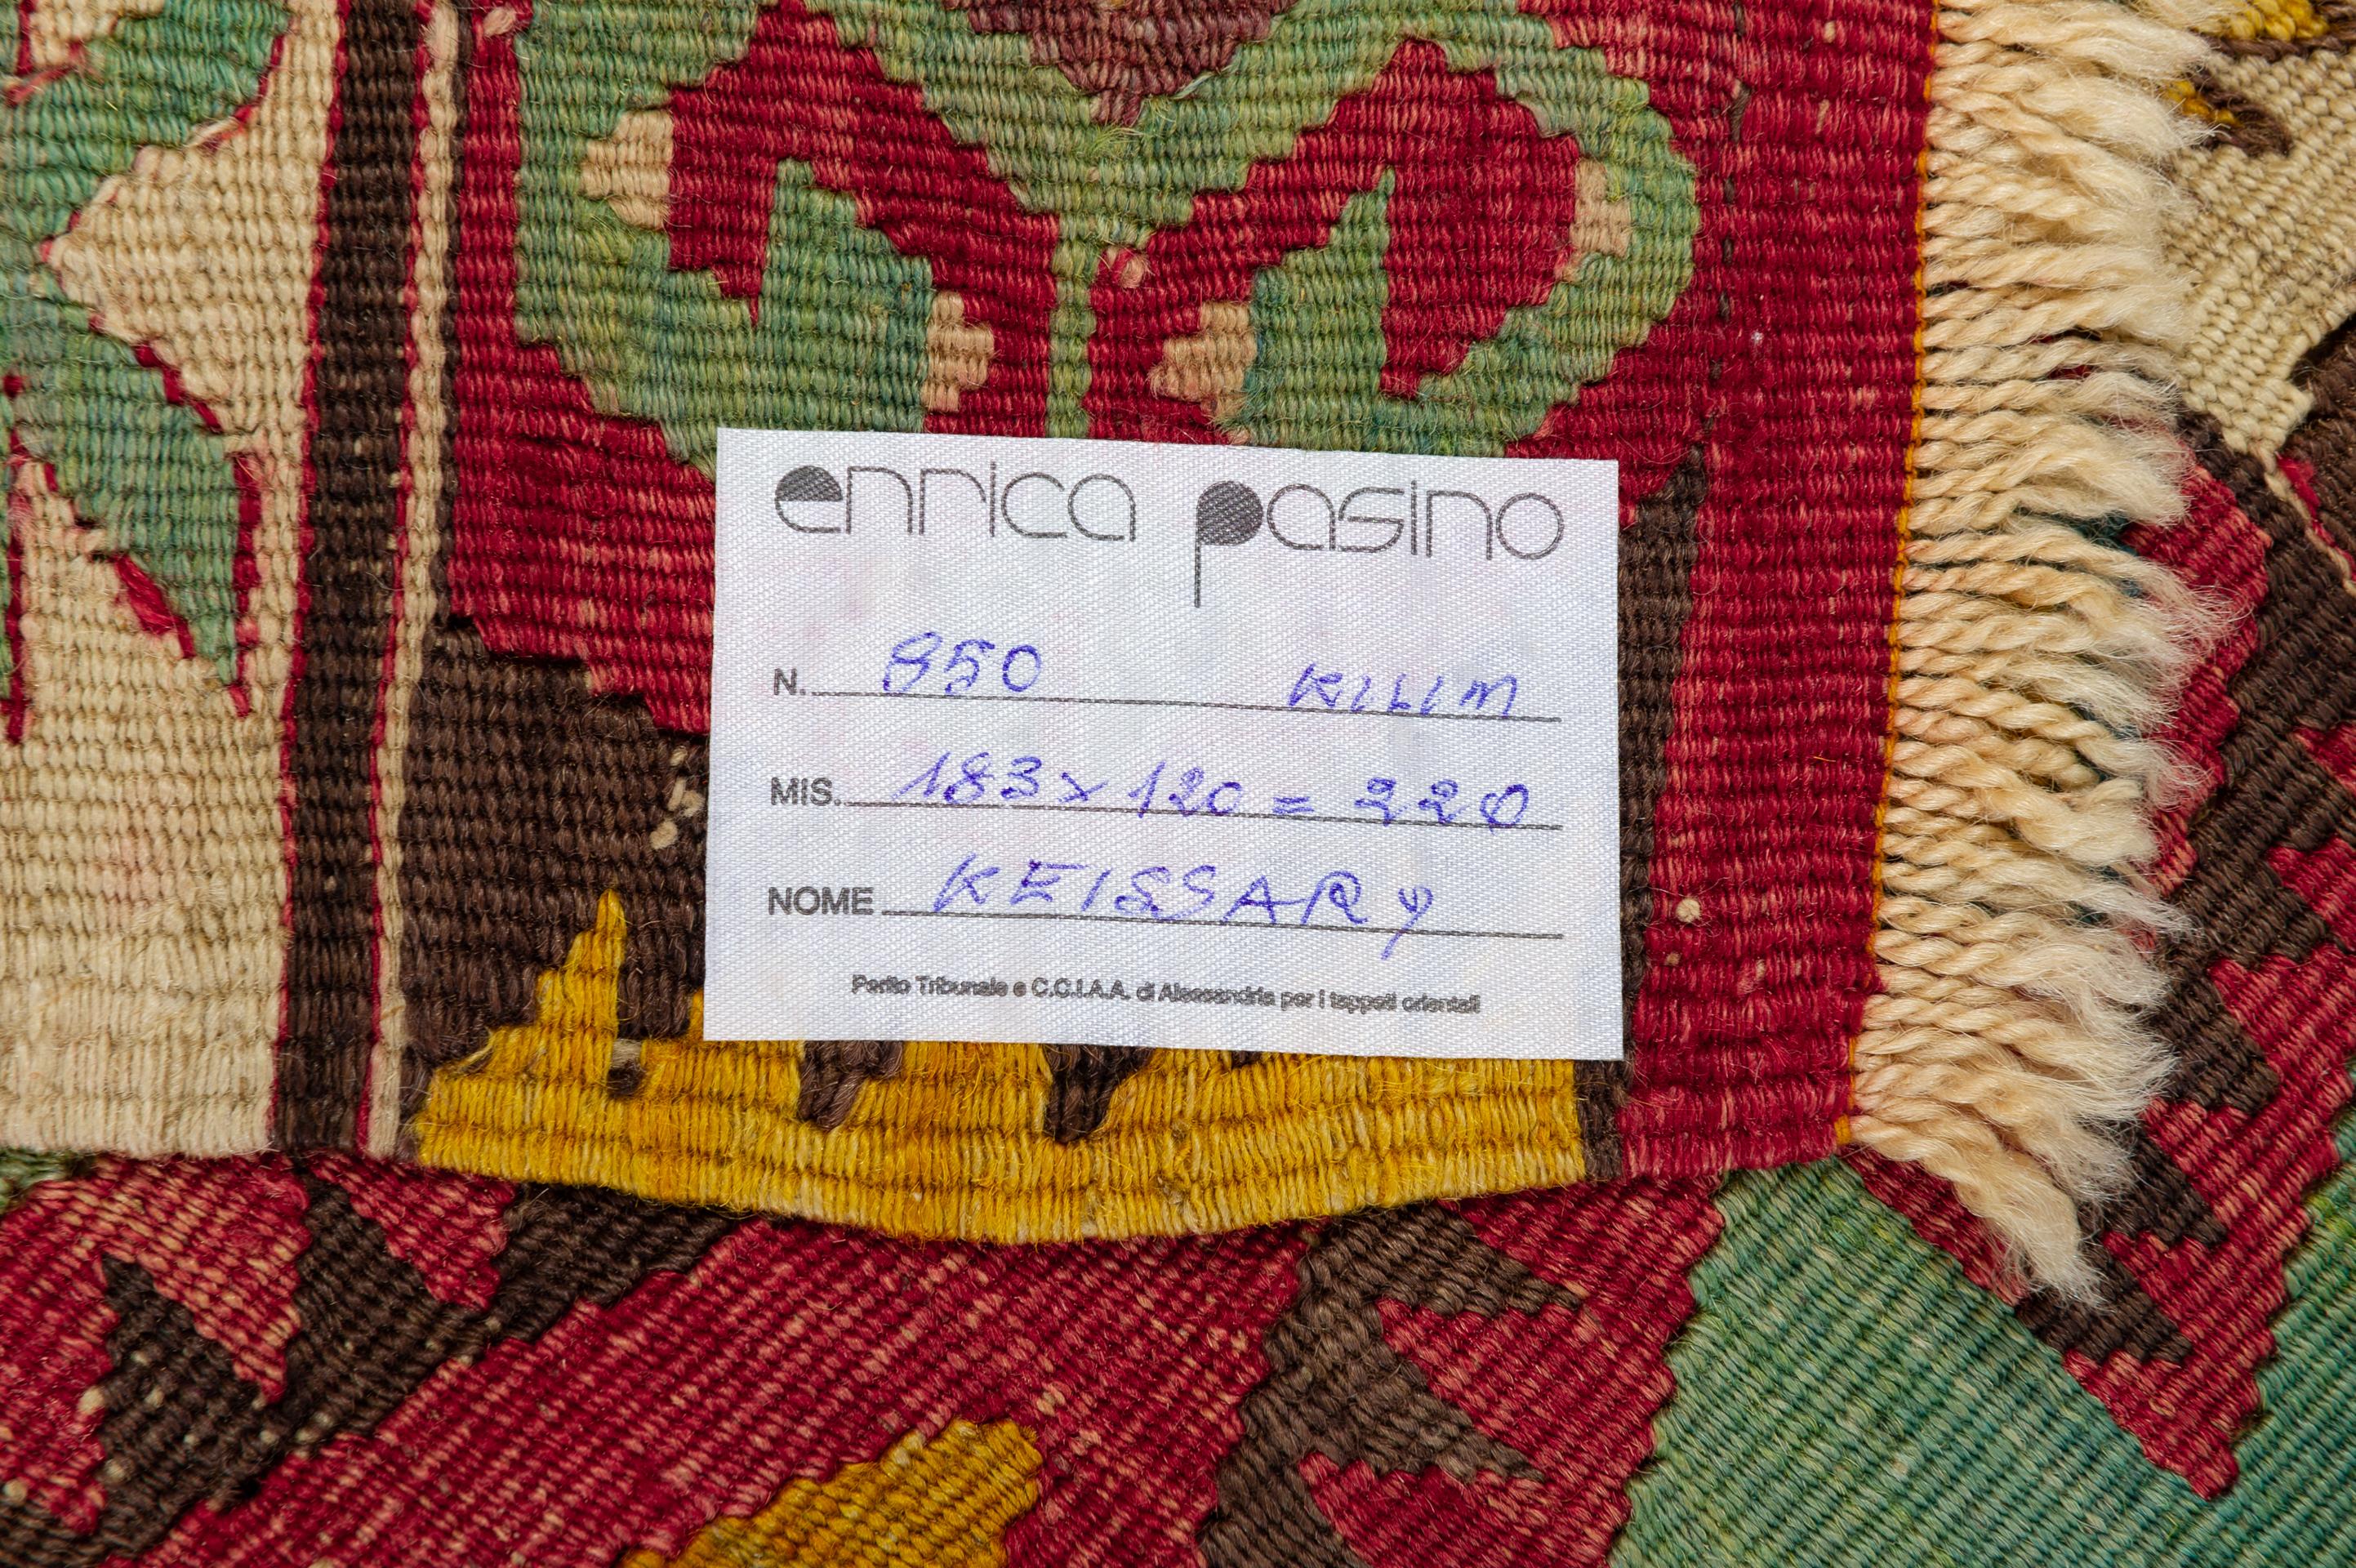 Polycrome kilim with beautiful natural vegetables colors and abraches: very rare the green color.
Interesting size, difficult to find. Perfect on the wall, like a painting.

ref. nr. 850 -